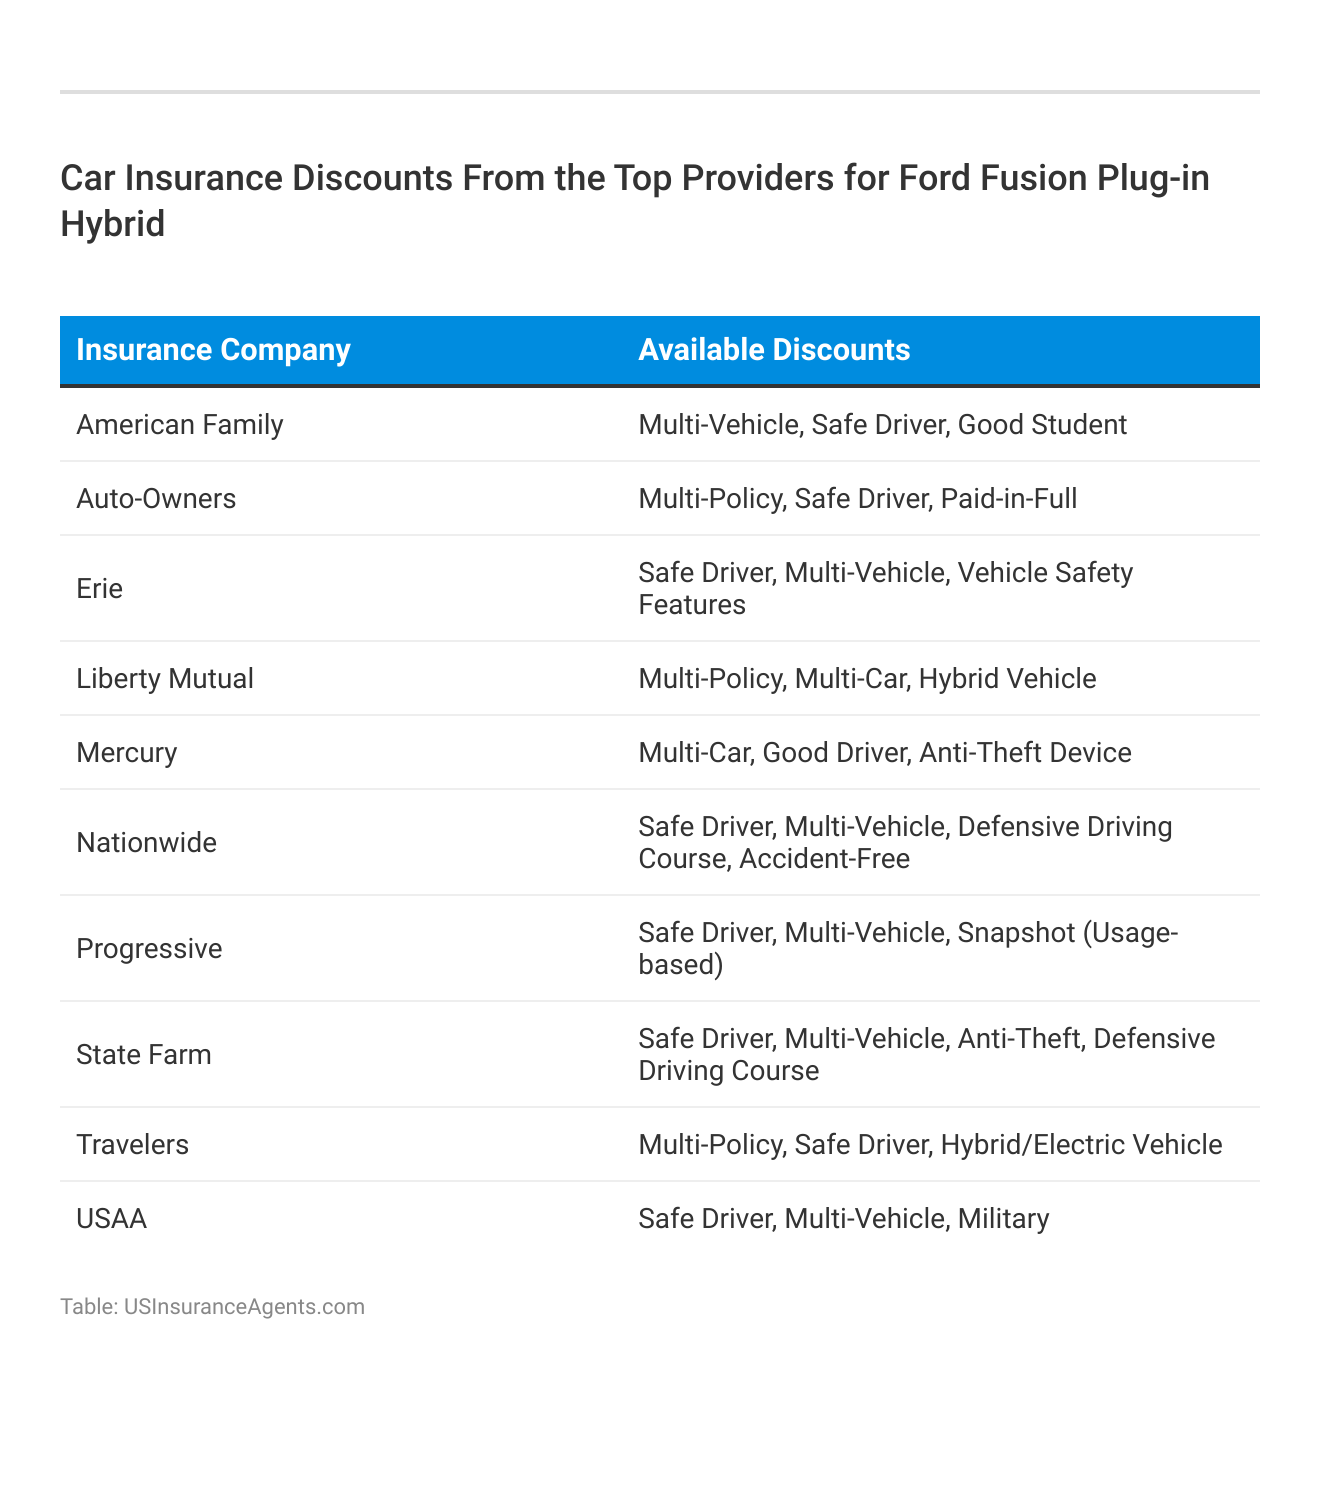 <h3>Car Insurance Discounts From the Top Providers for Ford Fusion Plug-in Hybrid</h3>